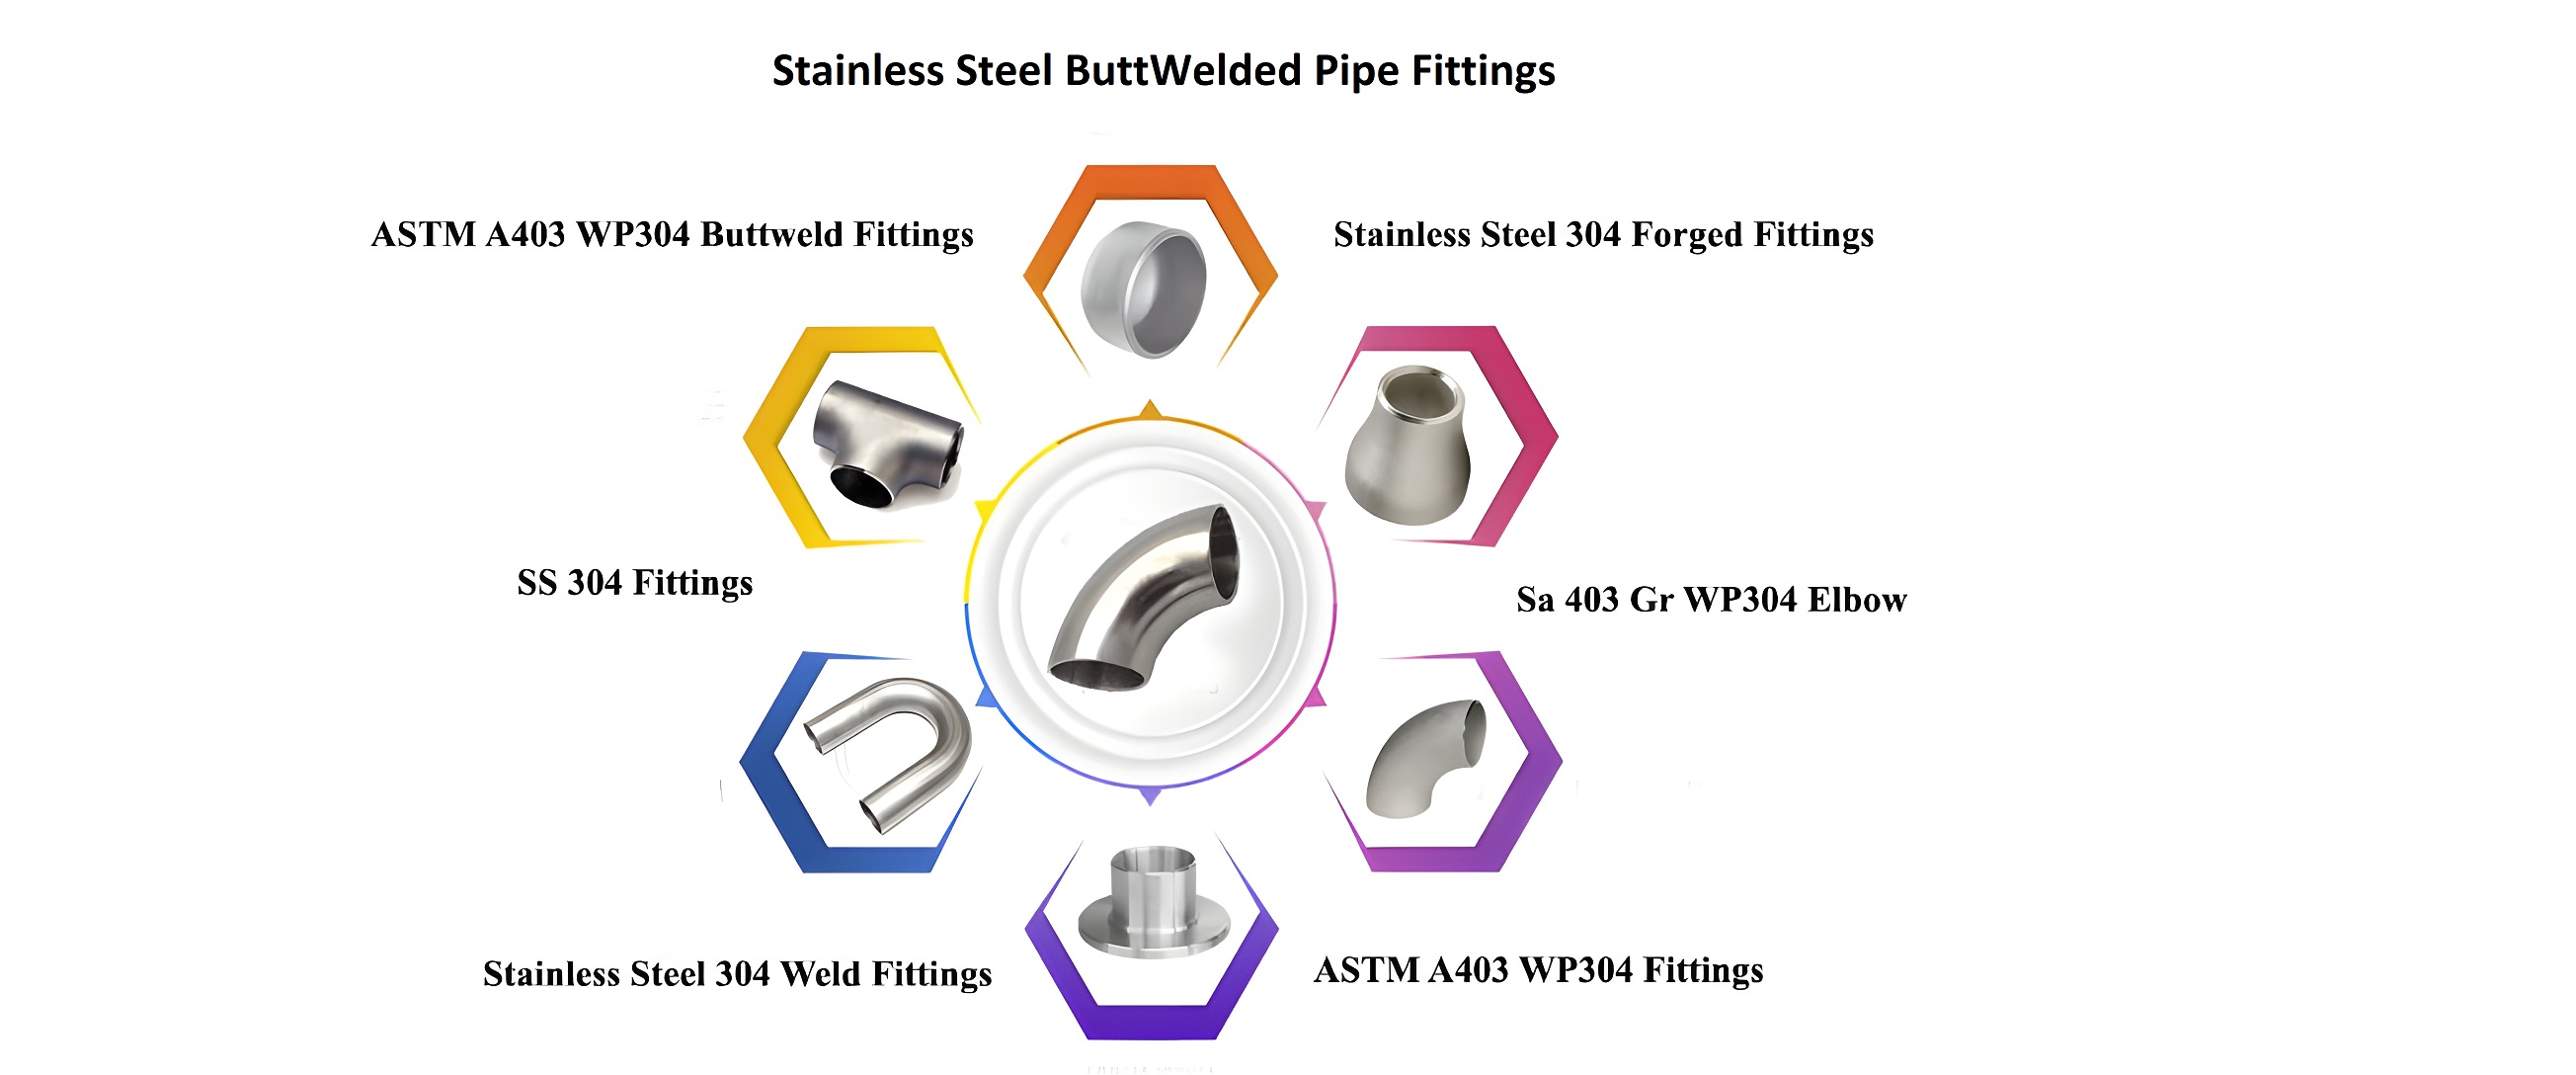 butt welded fittings hd infographic